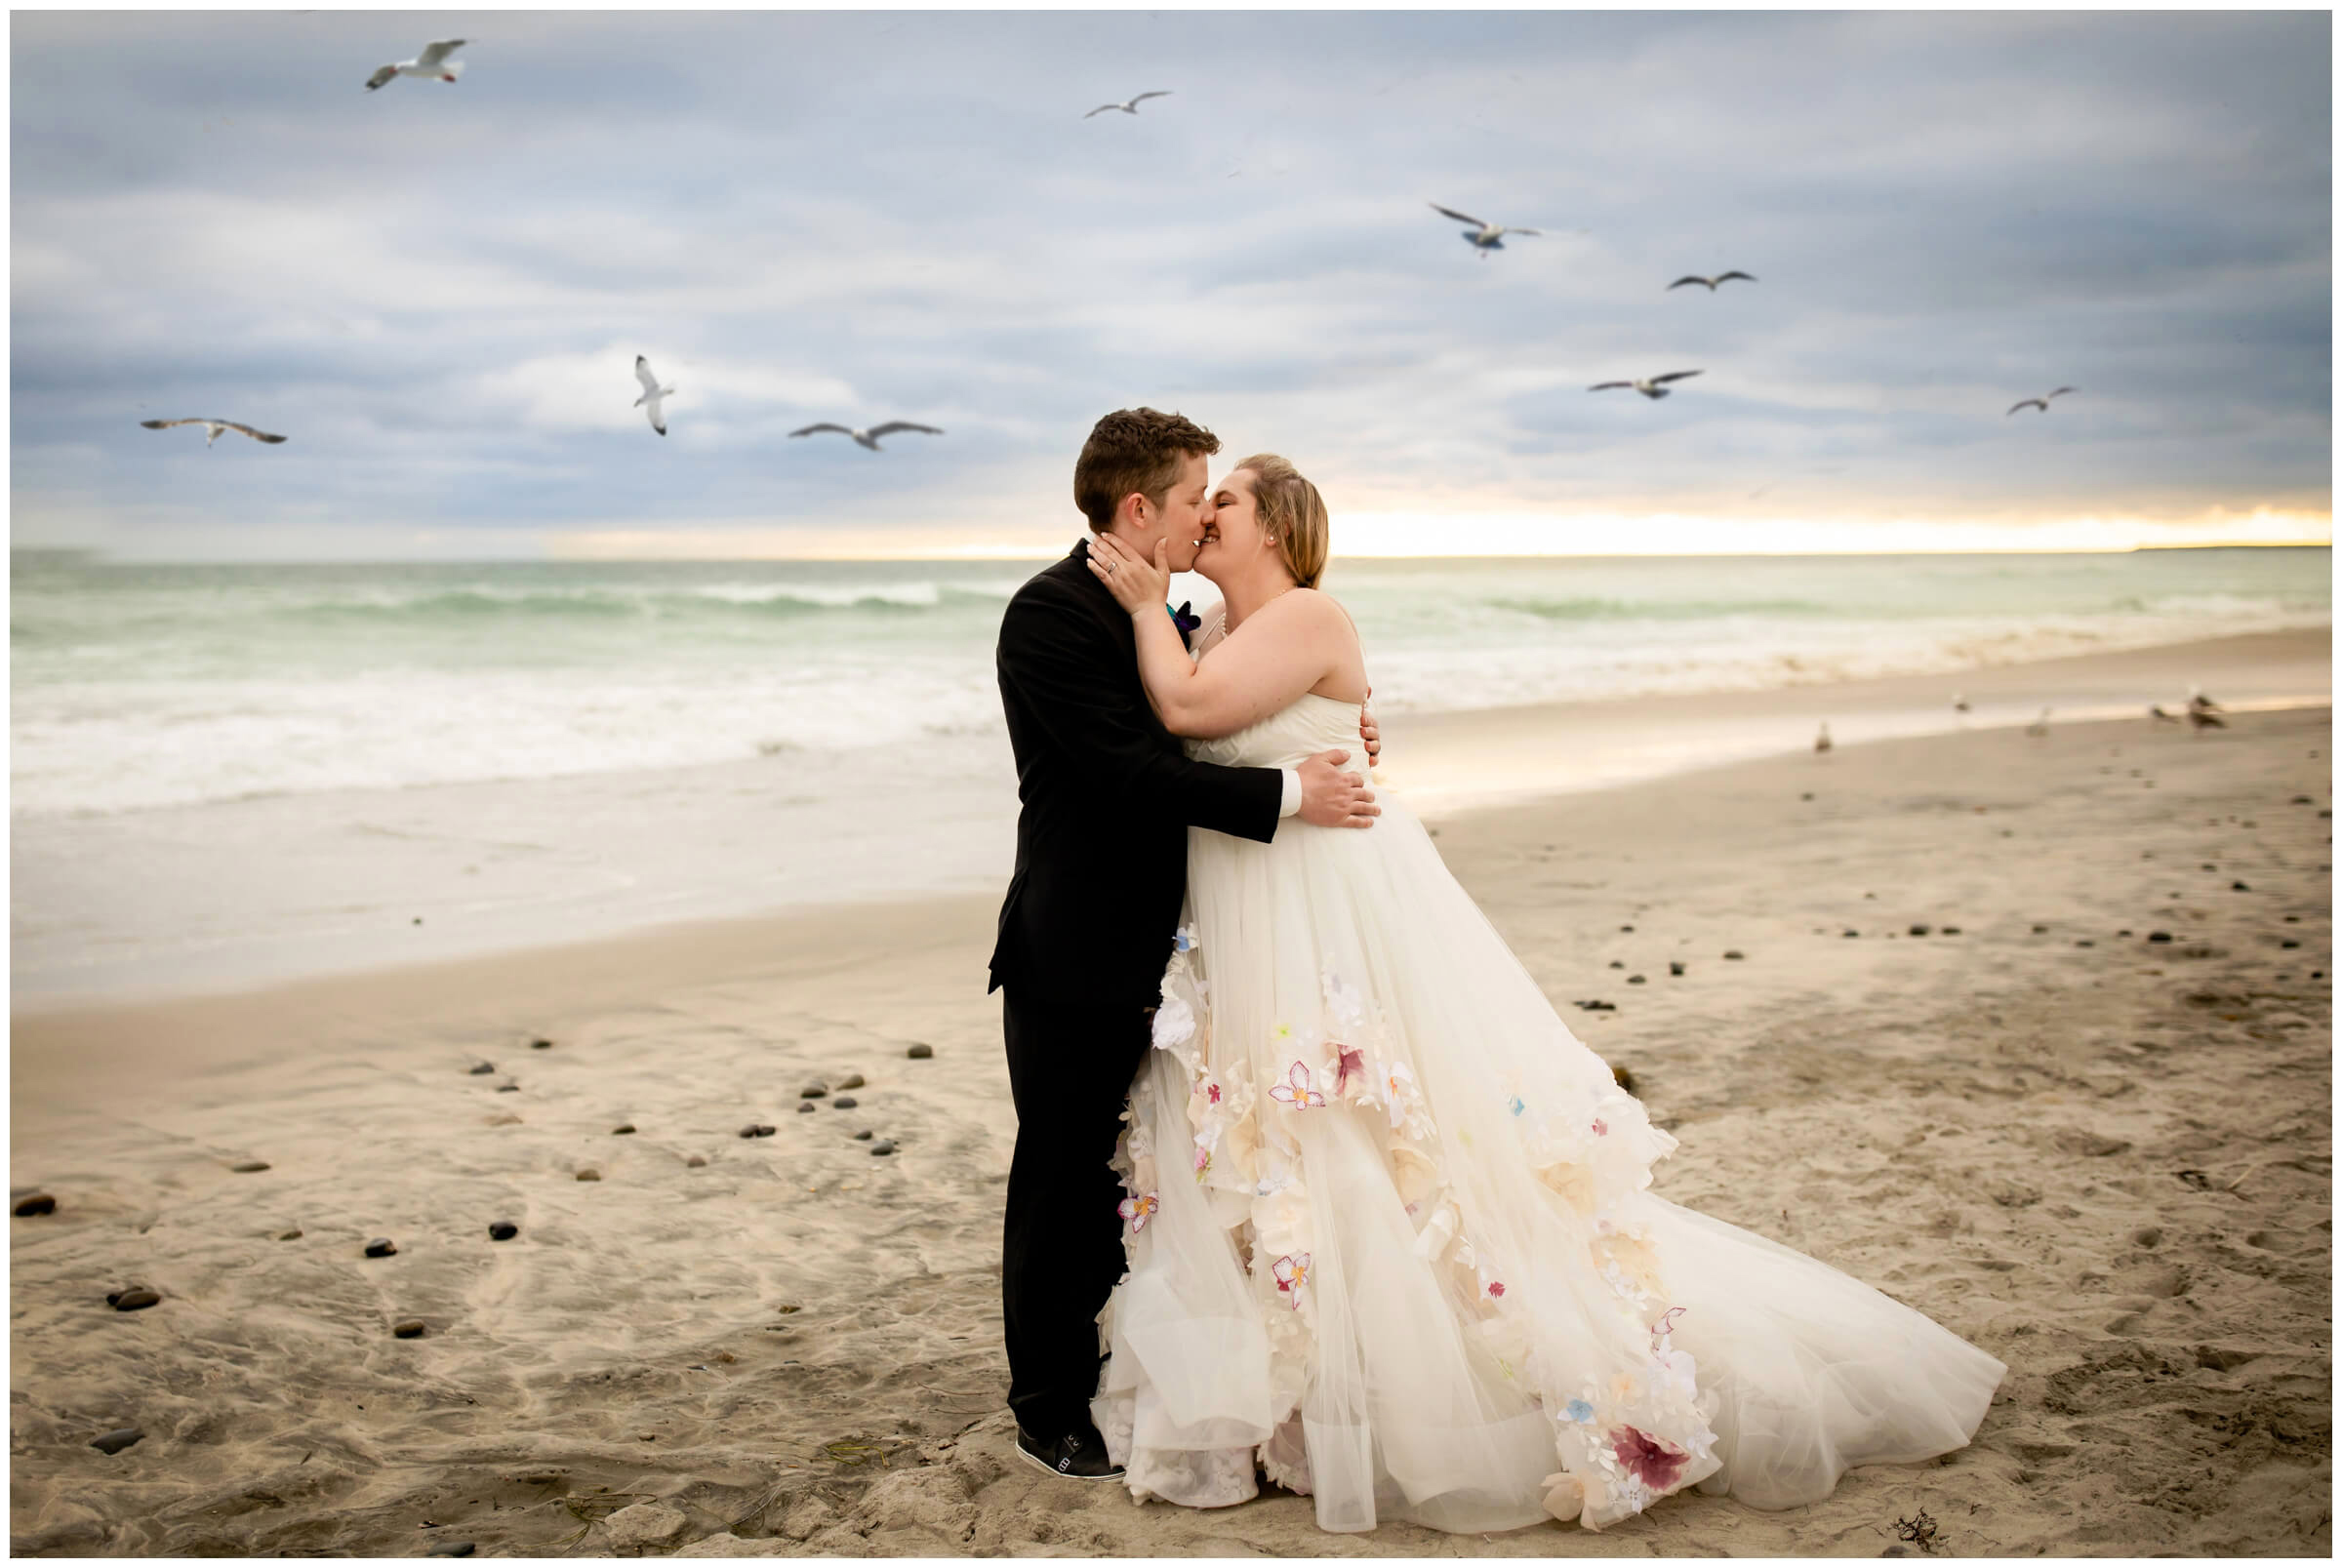 wedding couple kissing on the beach in Carlsbad California while seagulls fly around